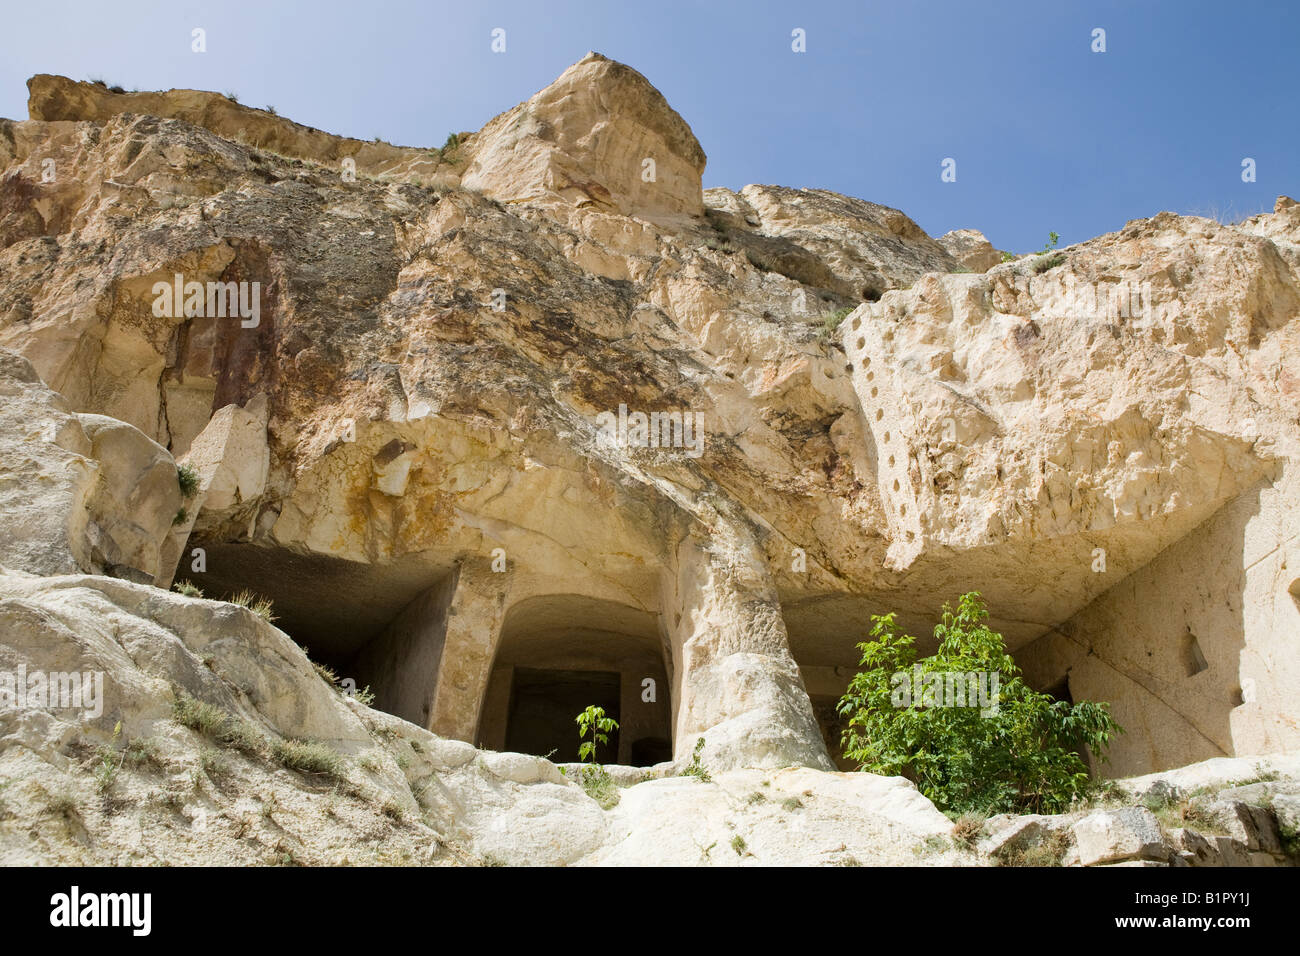 Remains of cave houses in the Urgup region of Cappadocia, Central Anatolia Turkey Stock Photo